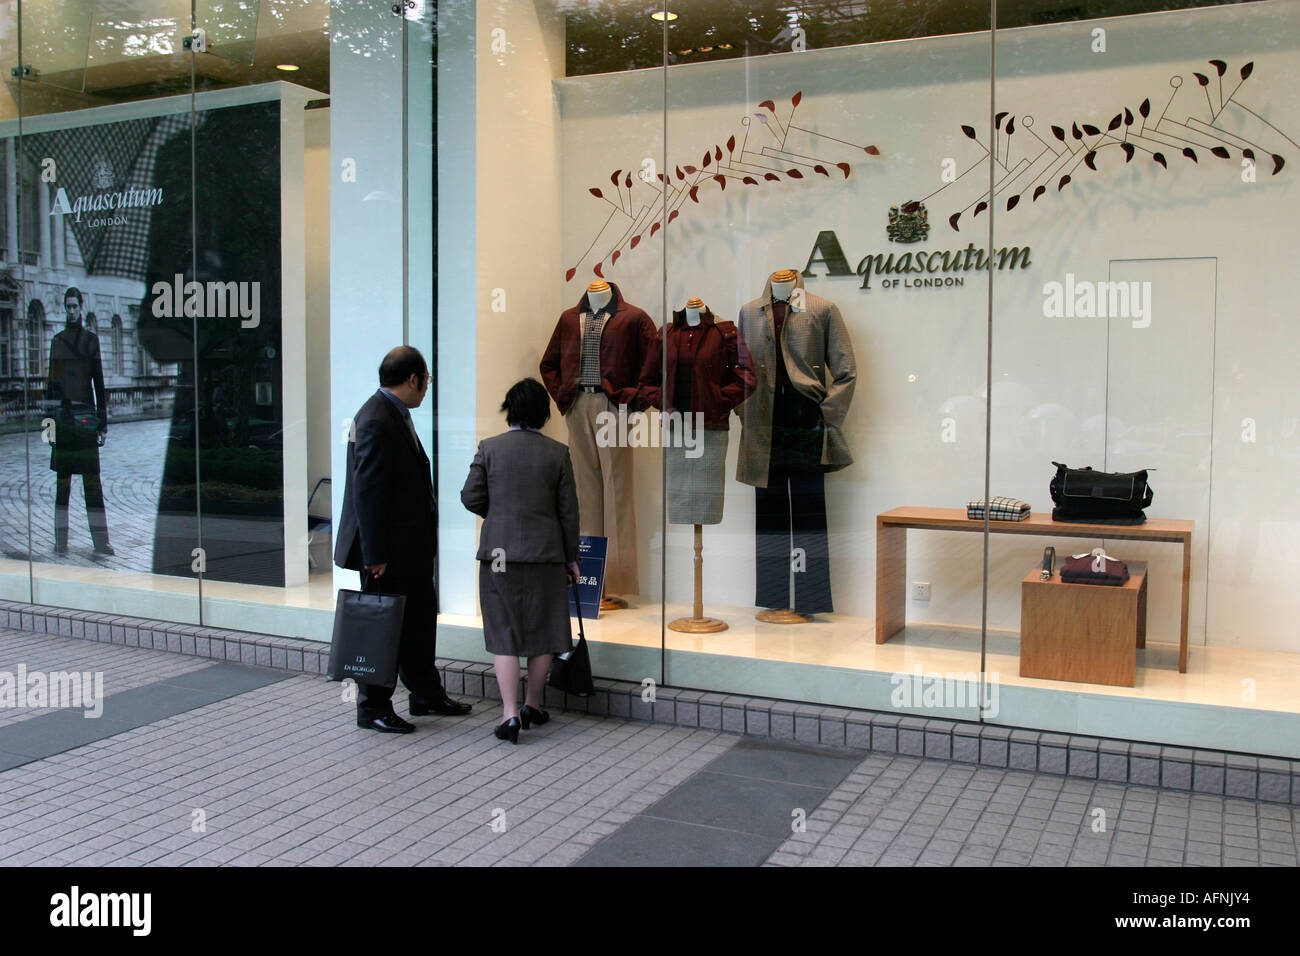 Aquascutum High Resolution Stock Photography and Images - Alamy